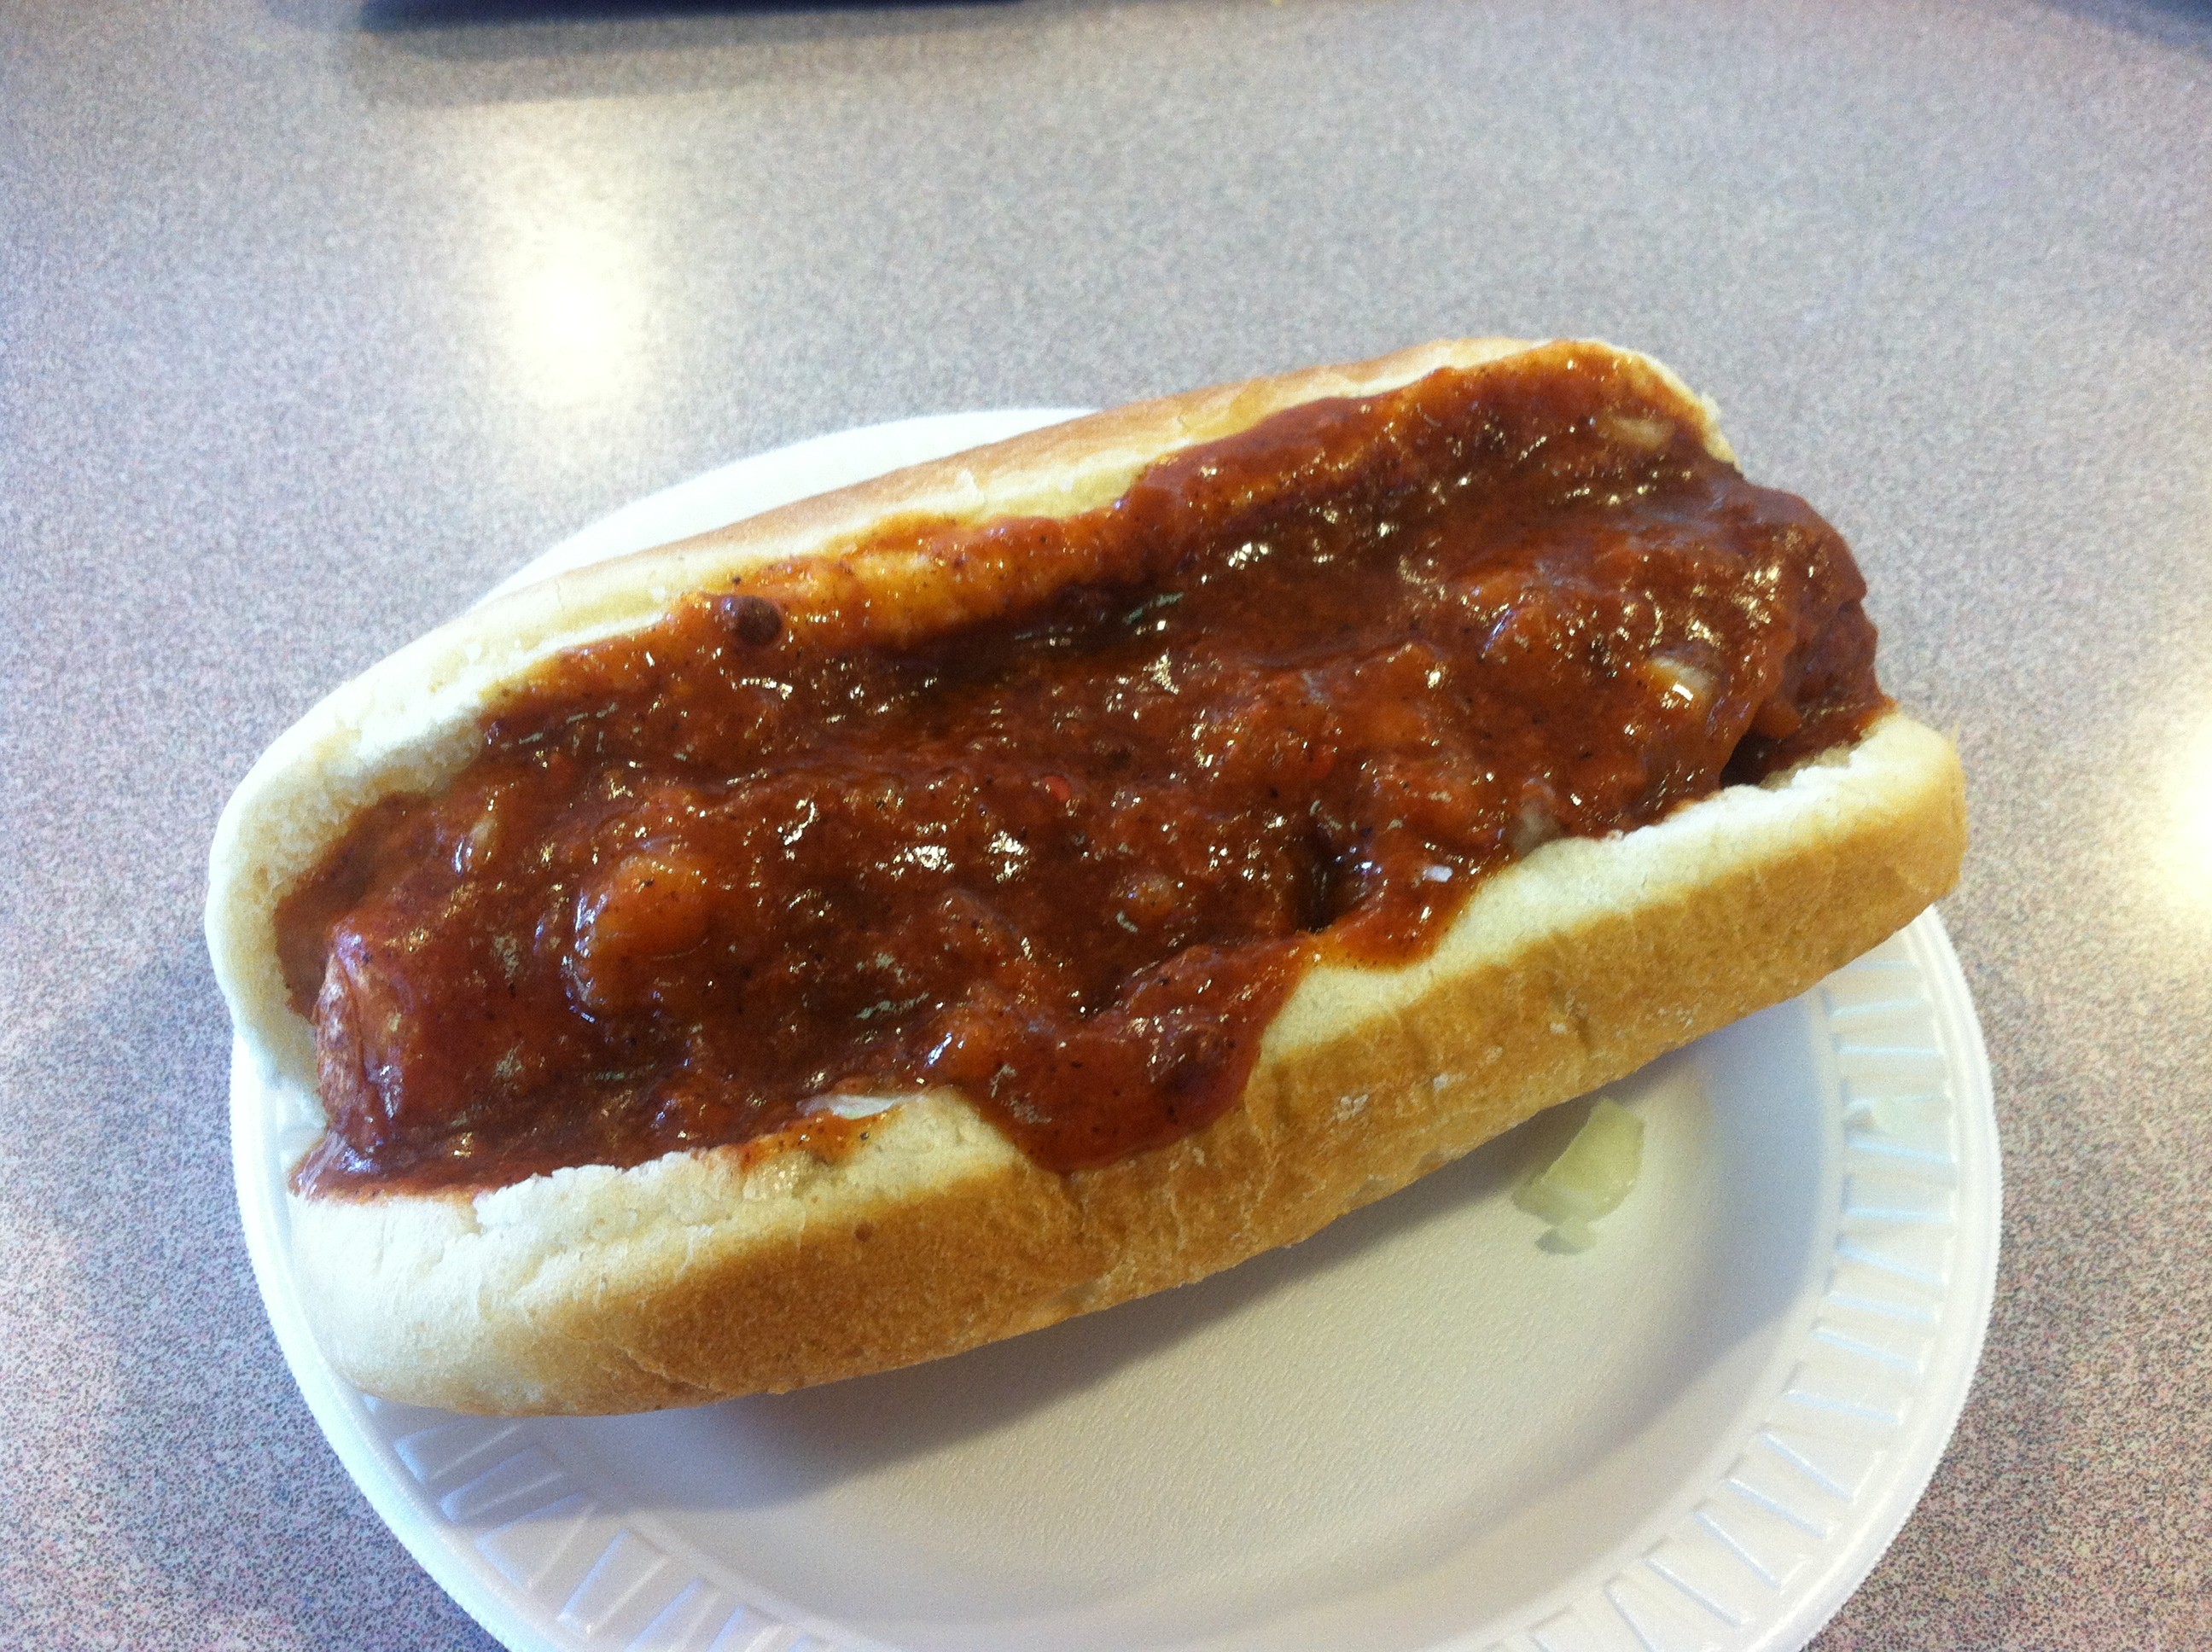 12 of the Best, Most Delicious Hot Dog Joints in New Jersey